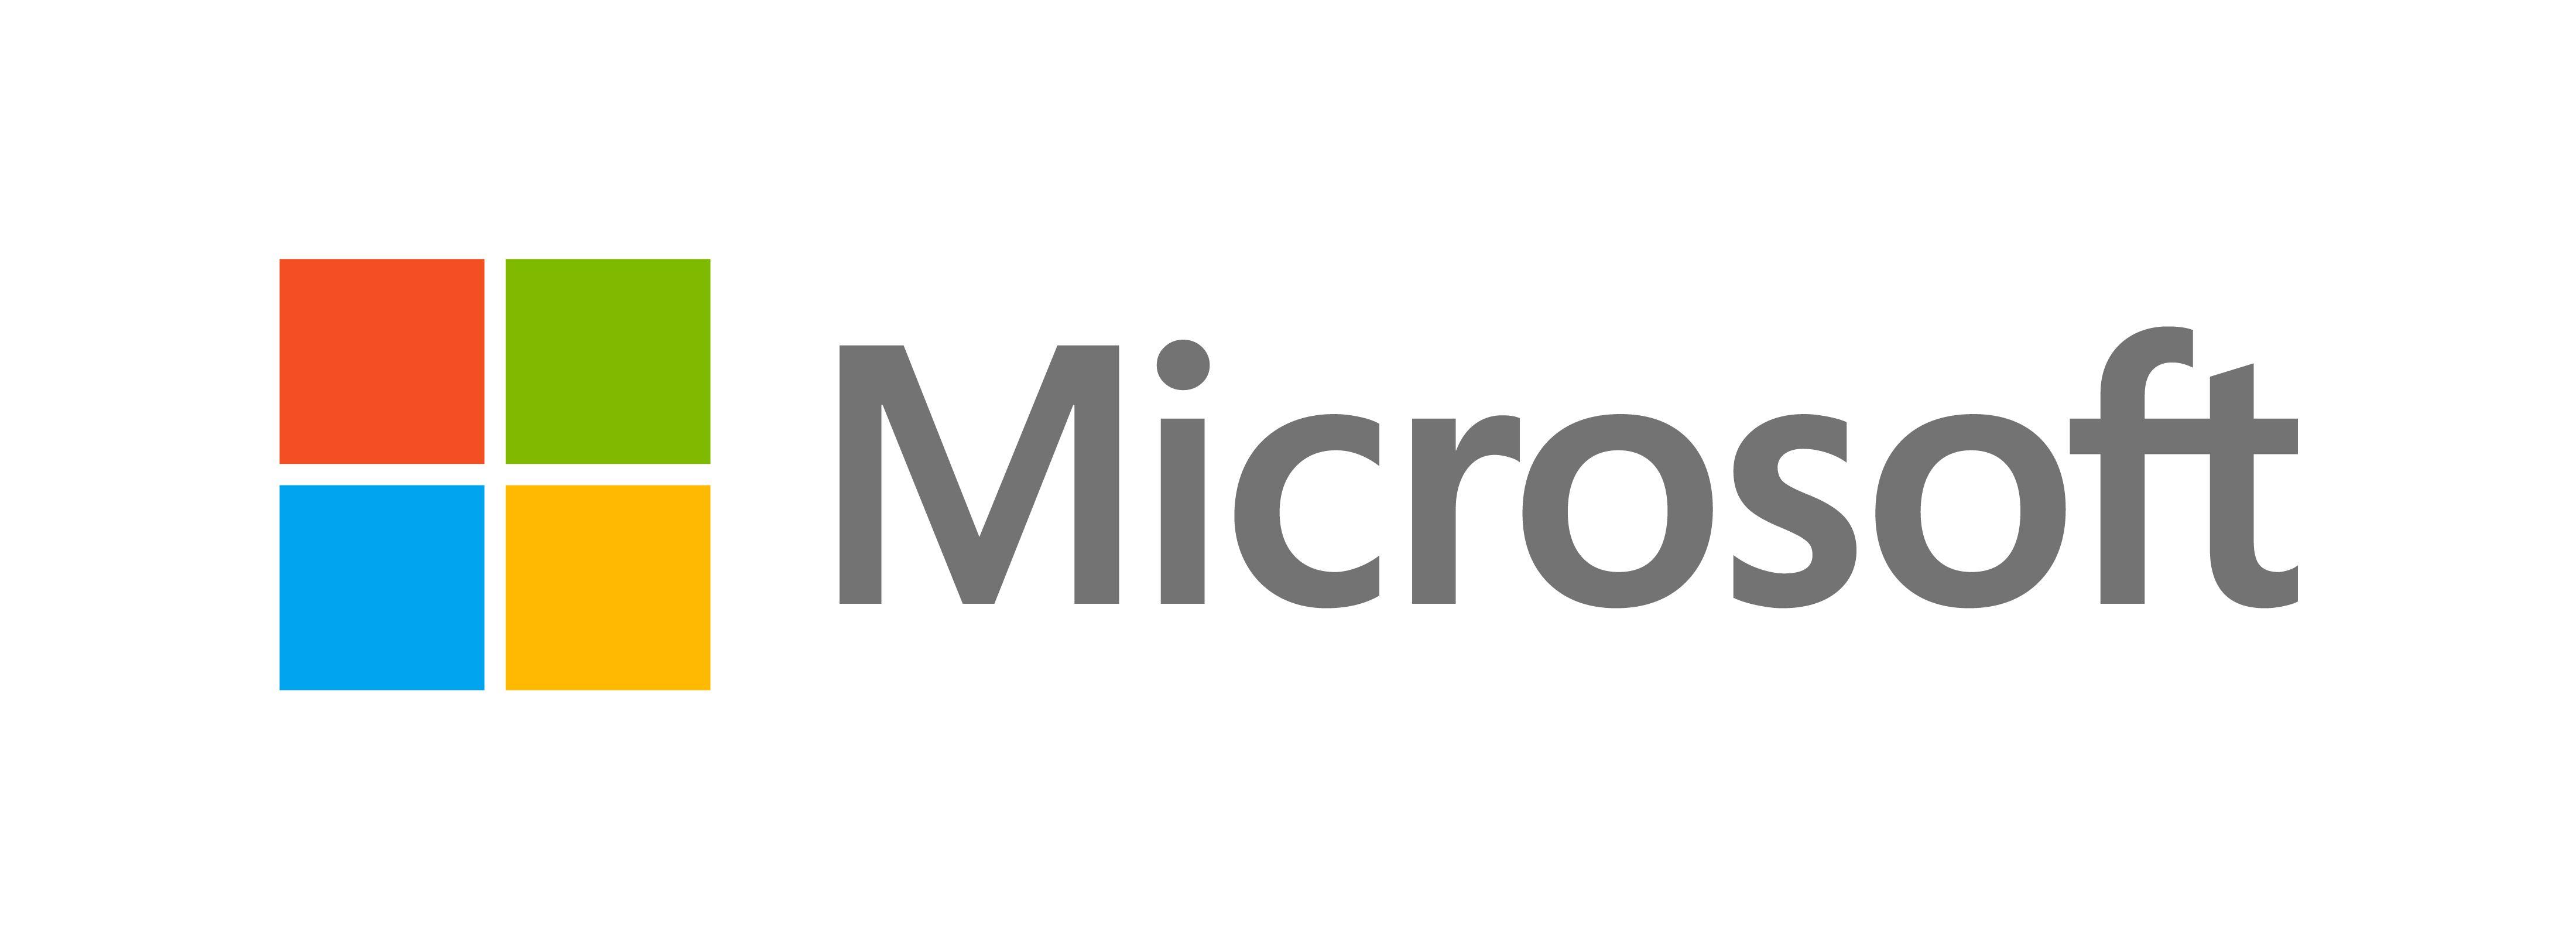 Microsoft Store Logo - Microsoft Unveils a New Look - The Official Microsoft Blog